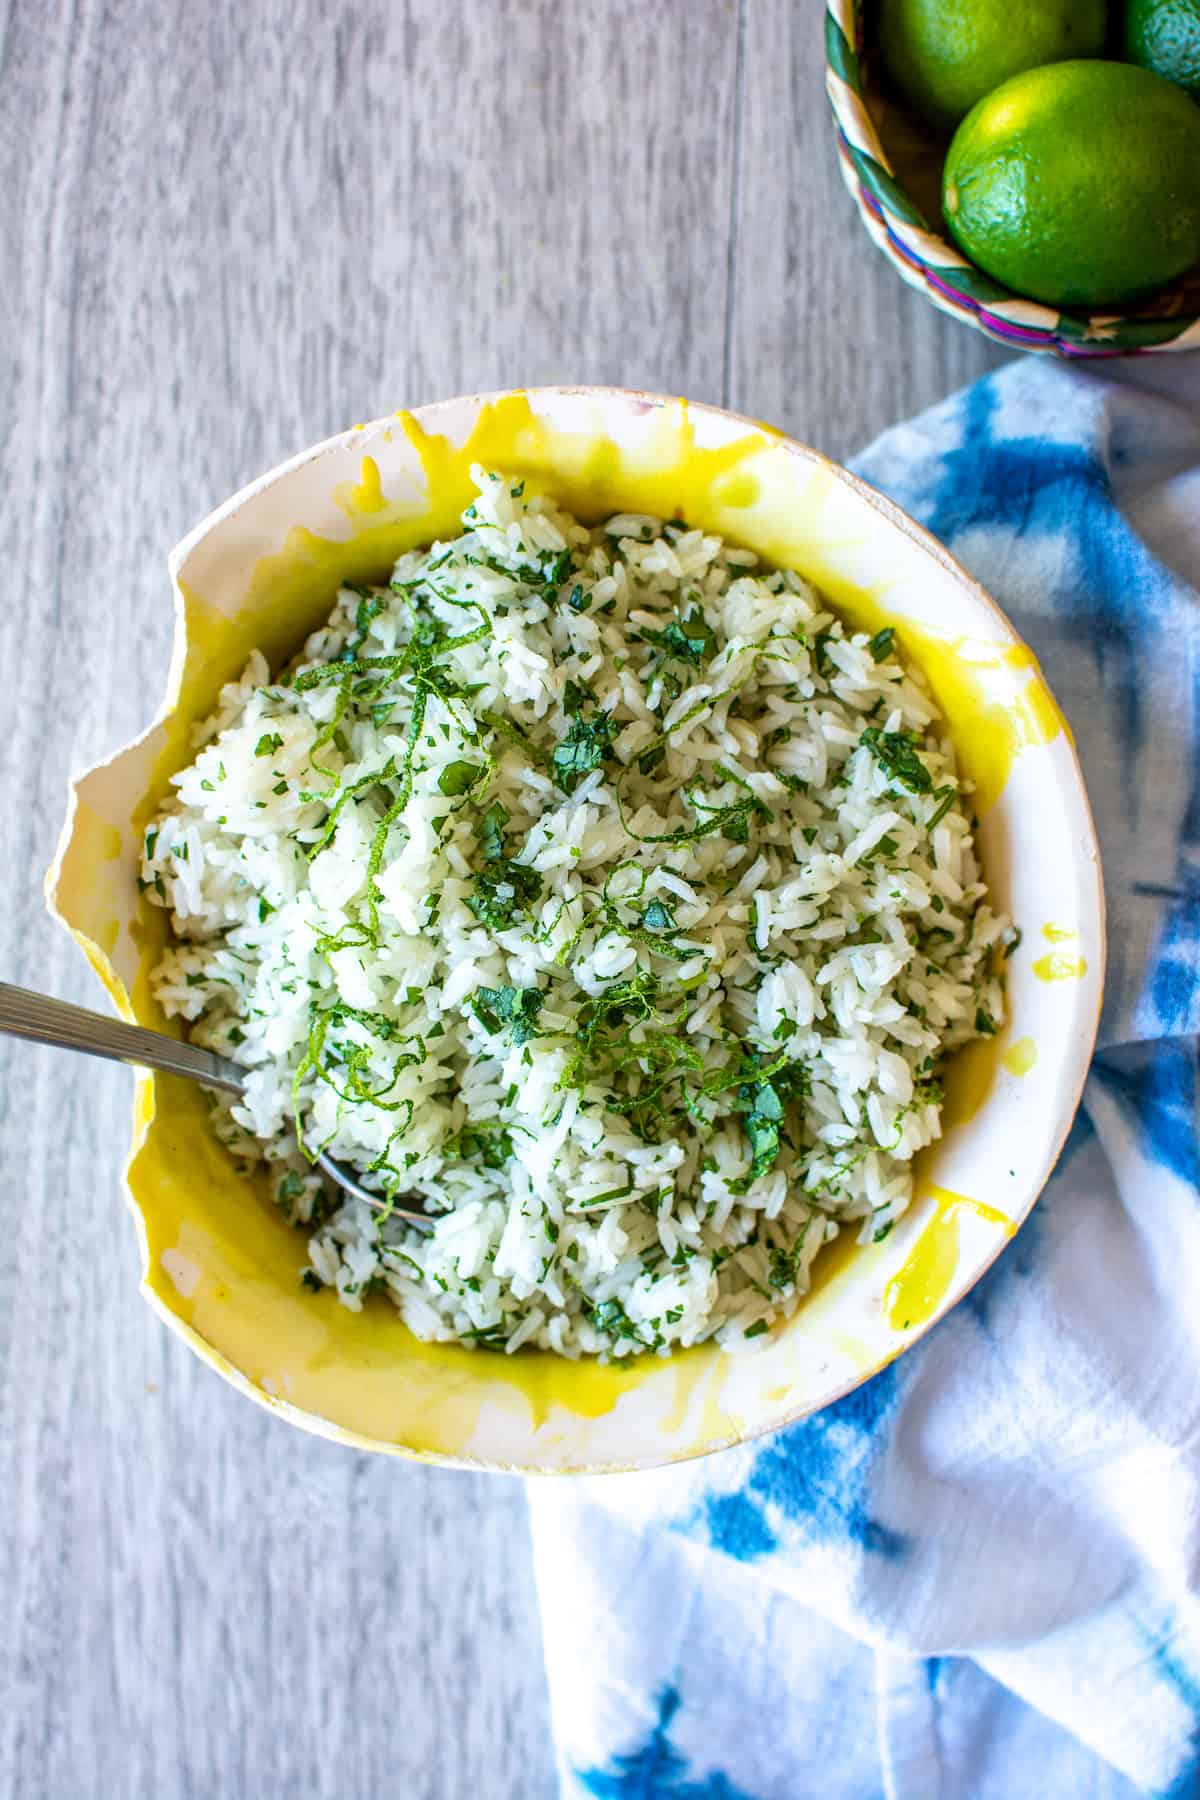 Here’s a simple recipe for Cilantro Lime Rice with stove top and rice cooker instructions included, using jasmine rice, fresh limes, fresh cilantro, and olive oil. Use it to make burrito bowls or as a side dish for your favorite Mexican meal. #cilantrolimerice #ricerecipe #mexicansidedish #cilantrorice